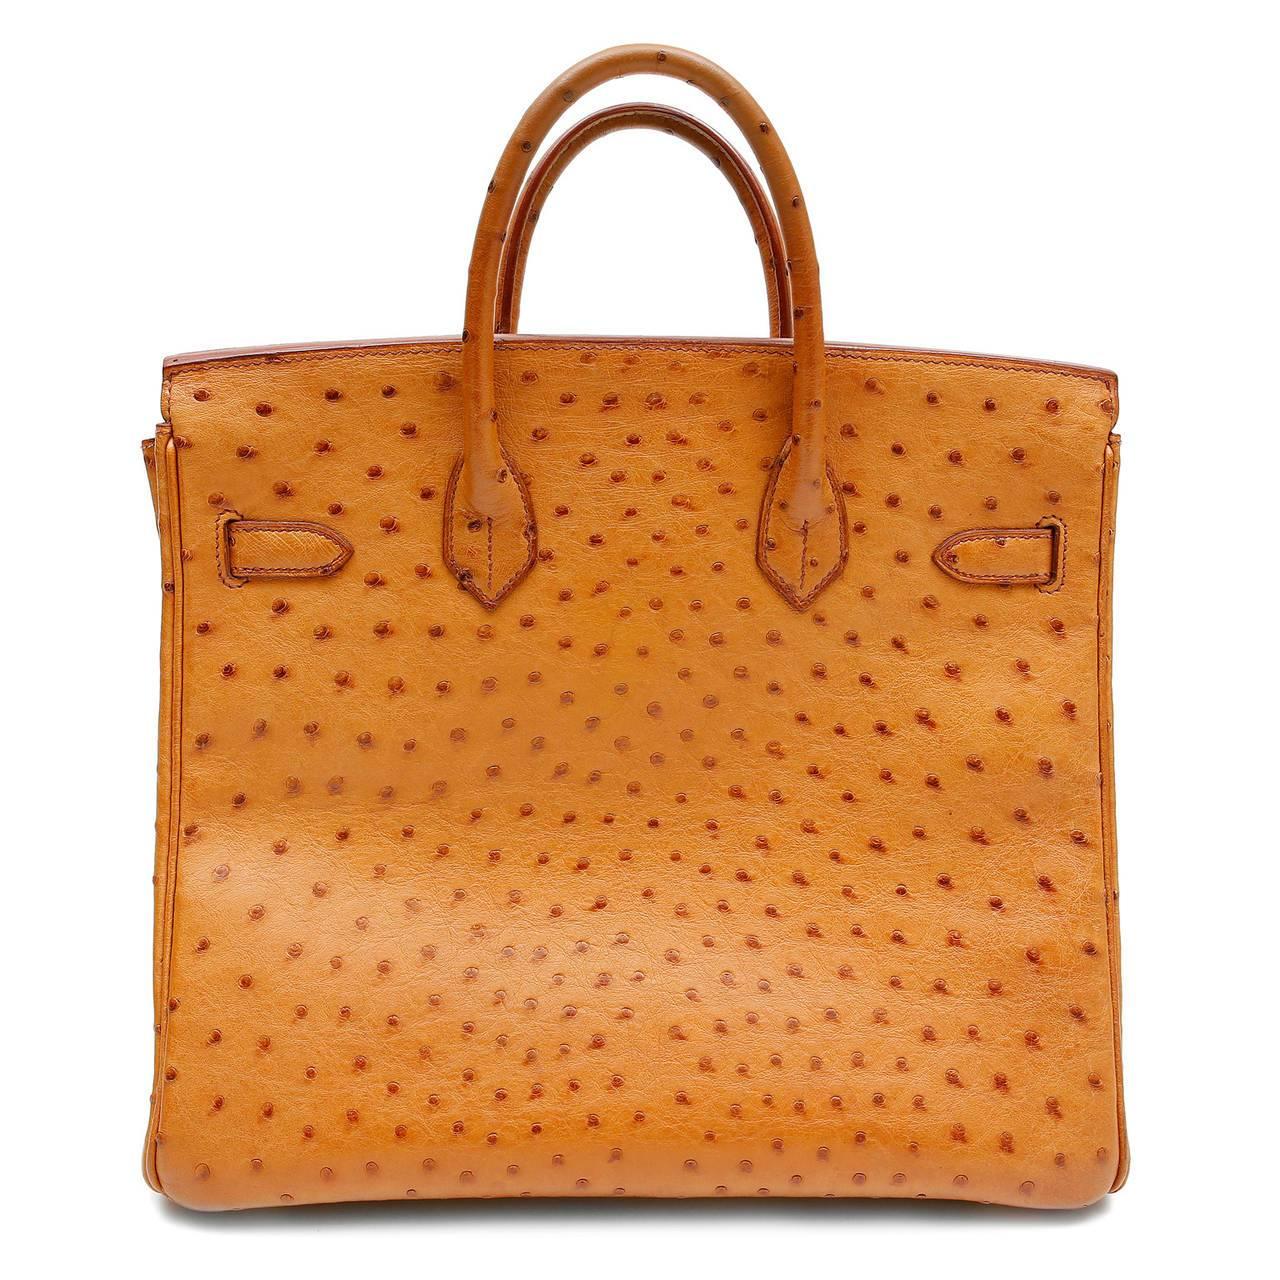 Hermes Miel Ostrich 32 cm Haut a Courroies- HAC Birkin Bag Pristine condition Considered the ultimate luxury item the world over and hand stitched by skilled craftsmen, wait lists of a year or more are commonplace for Hermes bags. This particular